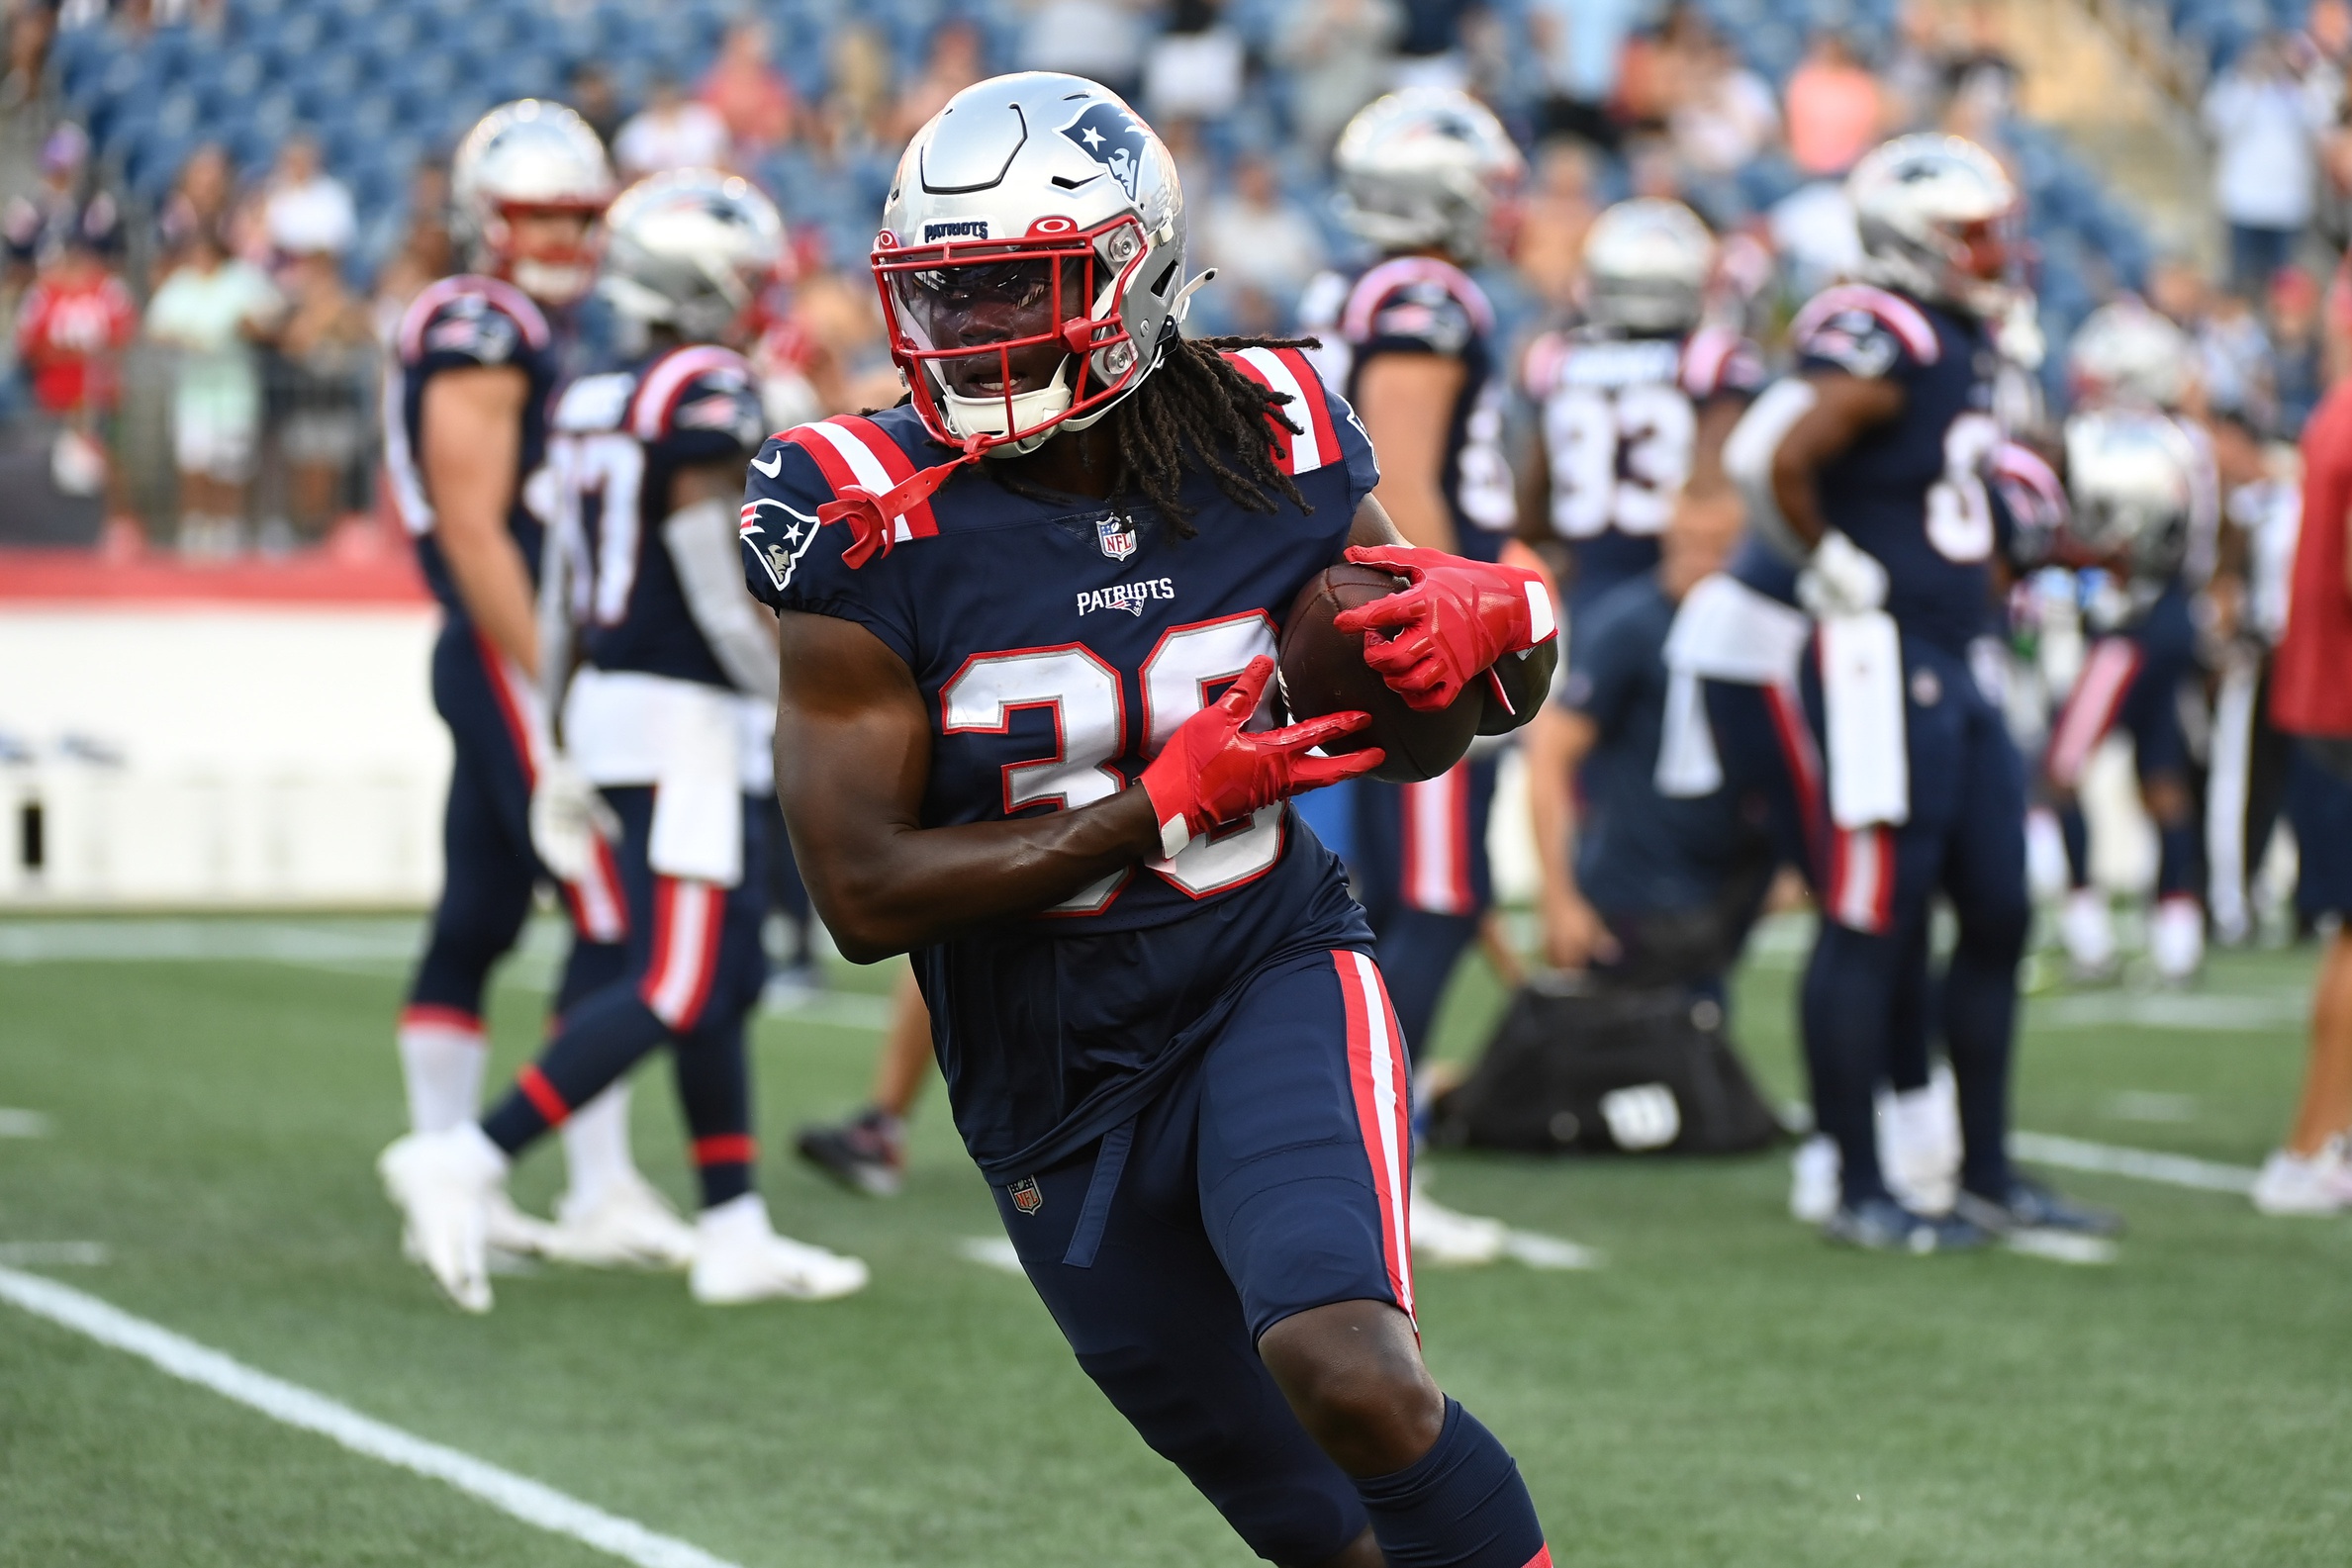 Fantasy Football Picks Today: Top DraftKings NFL DFS Targets